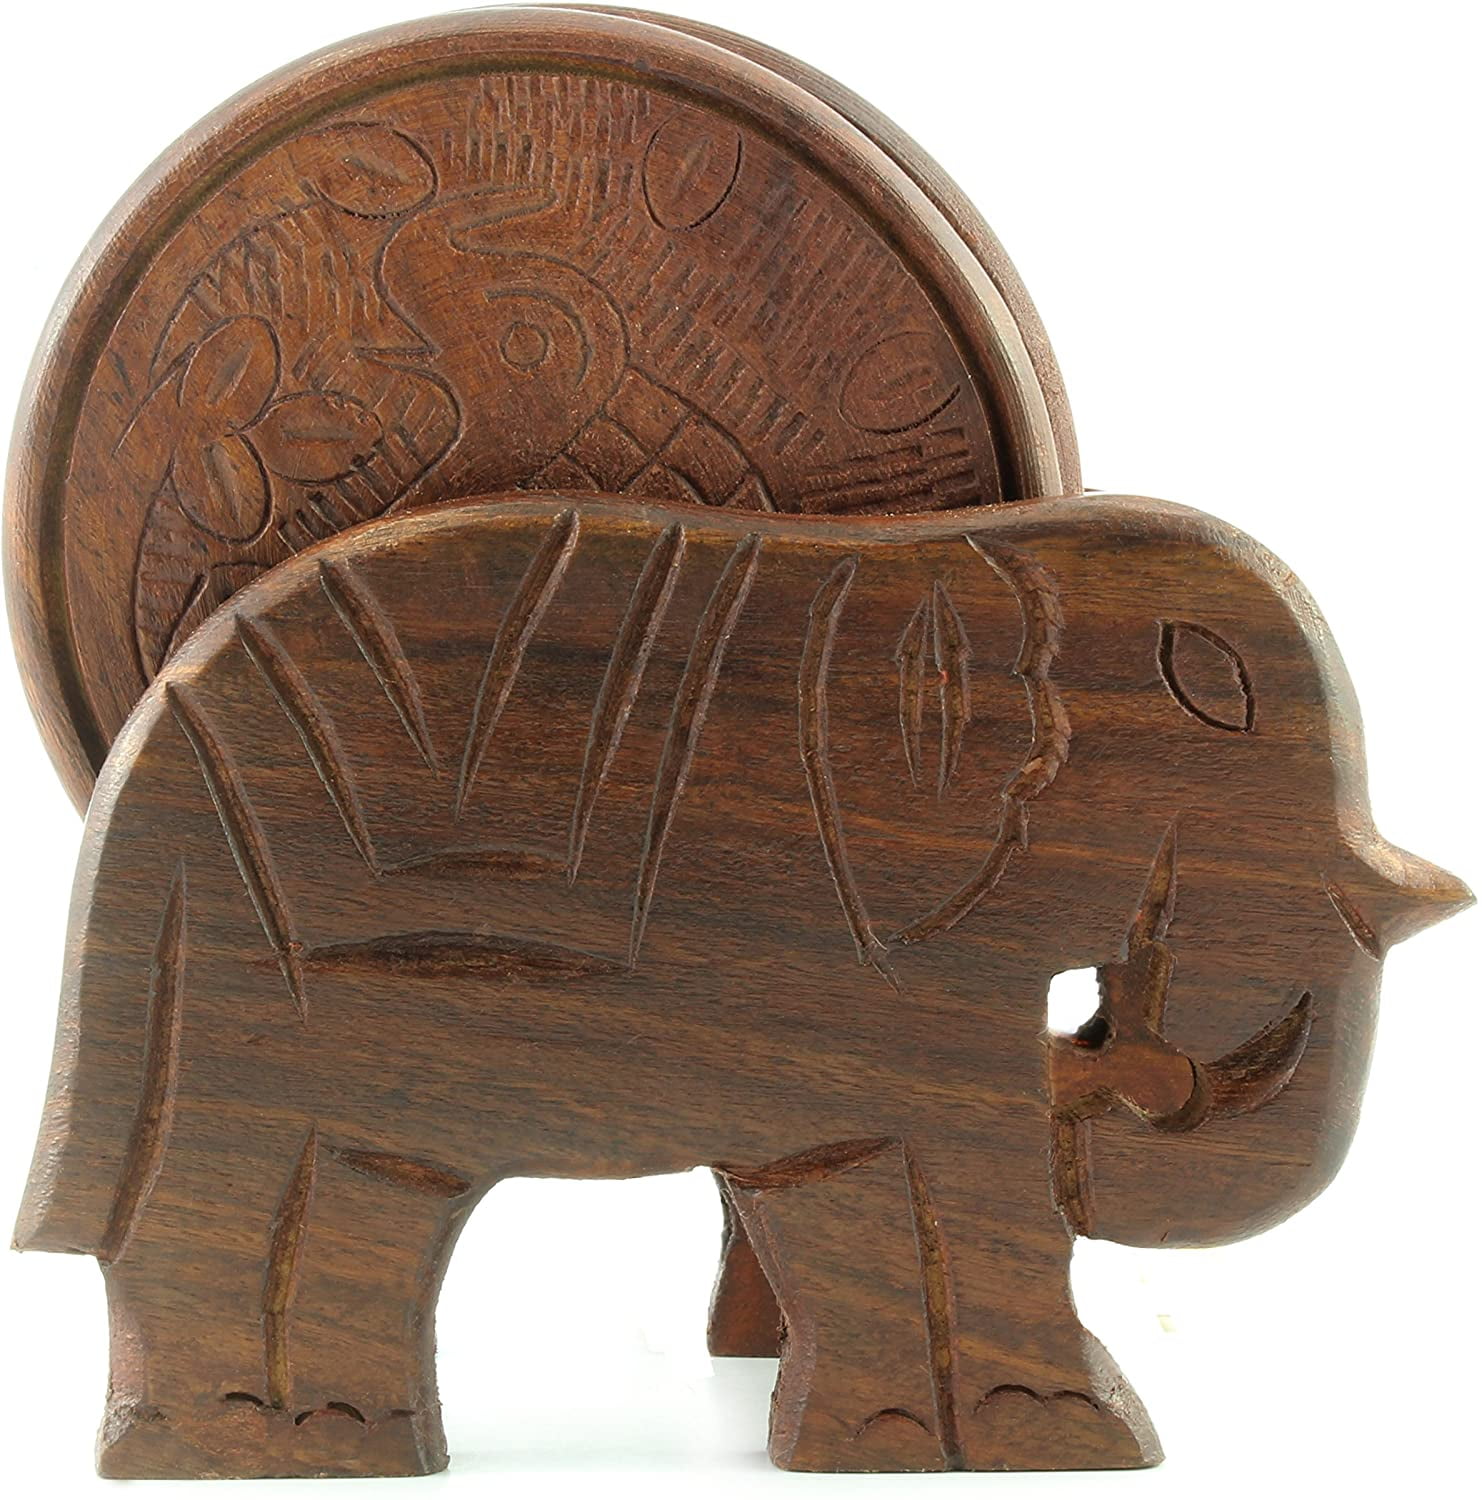 Elephant Design Wooden Coasters With Holder set of 6 Handcrafted 